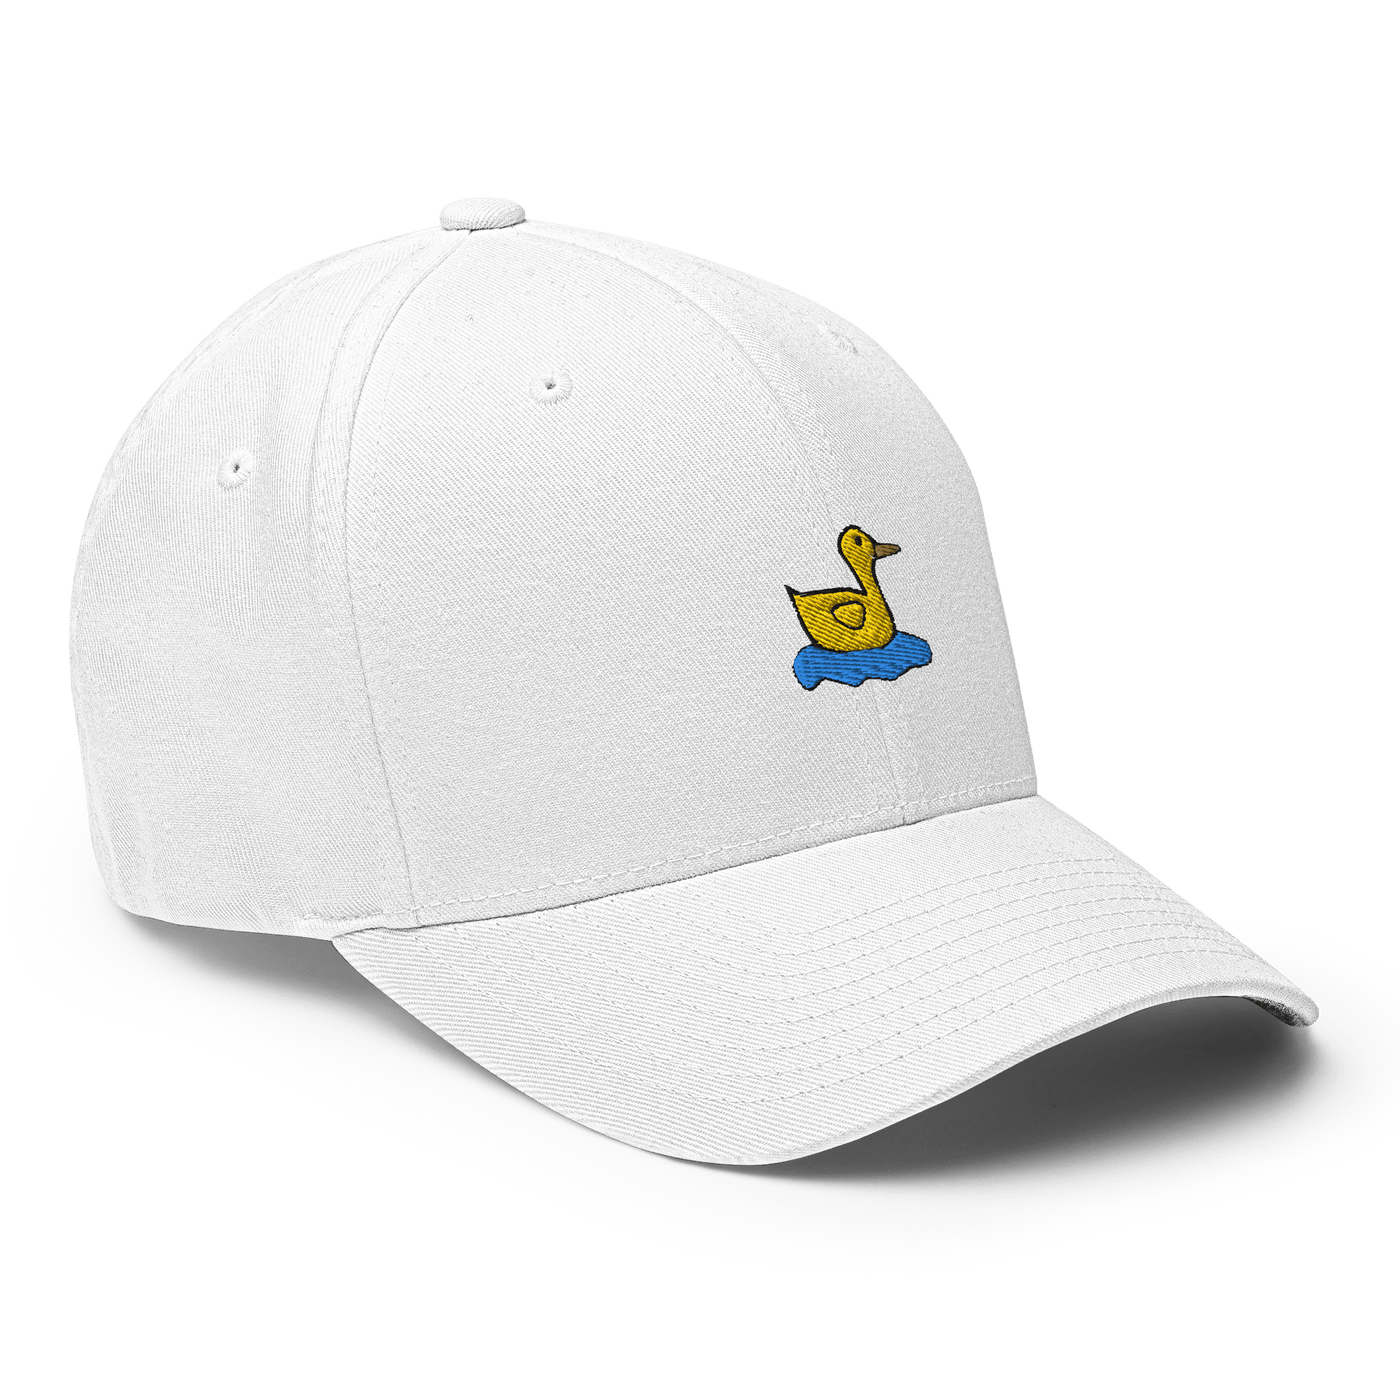 Lonely Duck Flexfit Cap - White - S/M - Just Another Cap Store